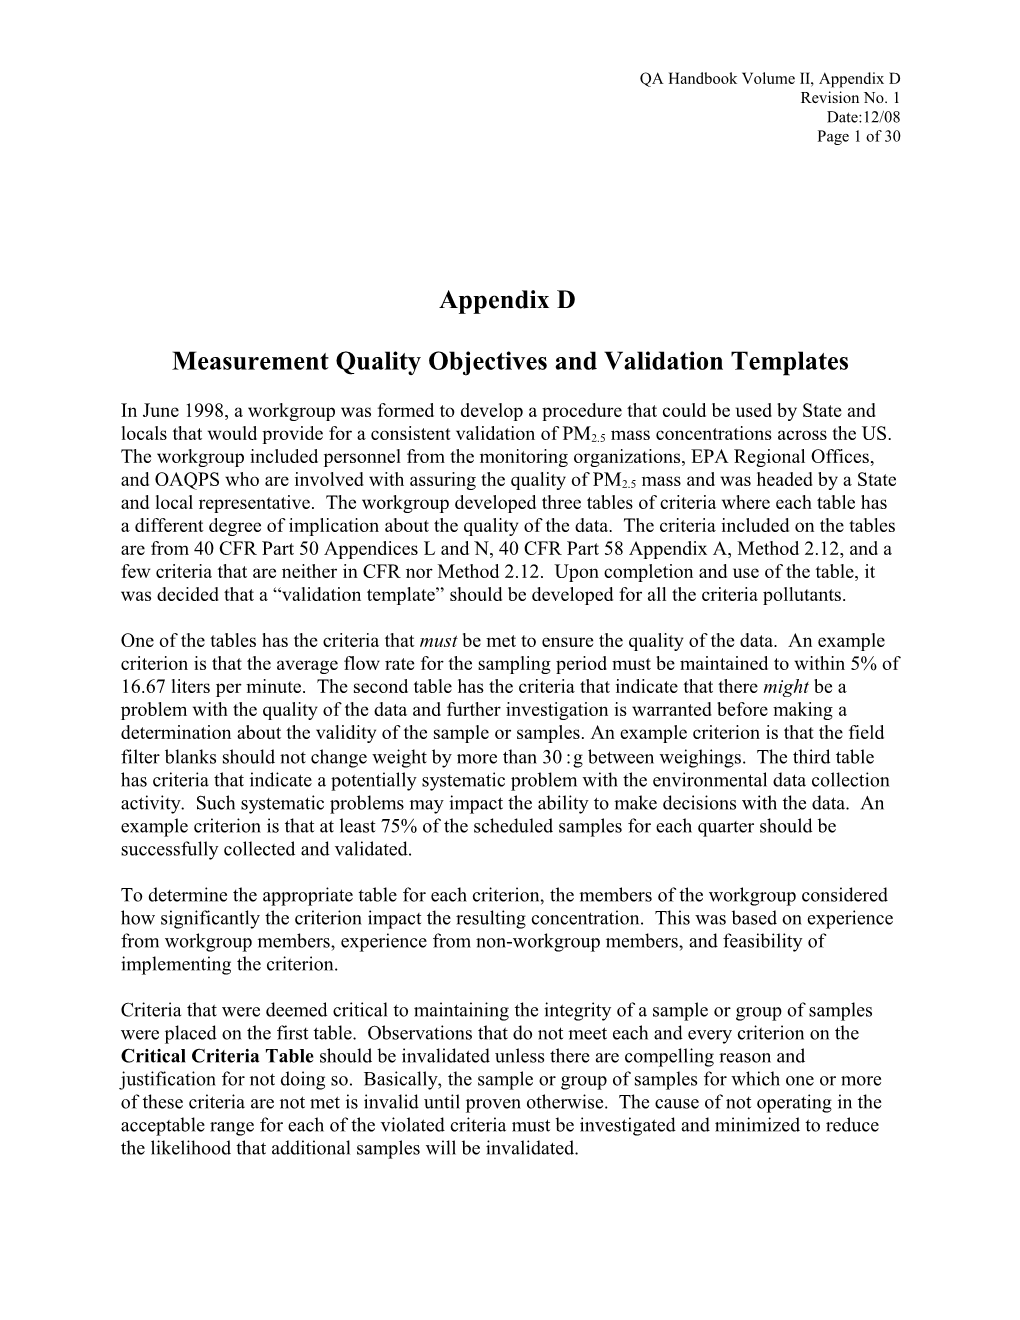 Measurement Quality Objectives and Validation Templates